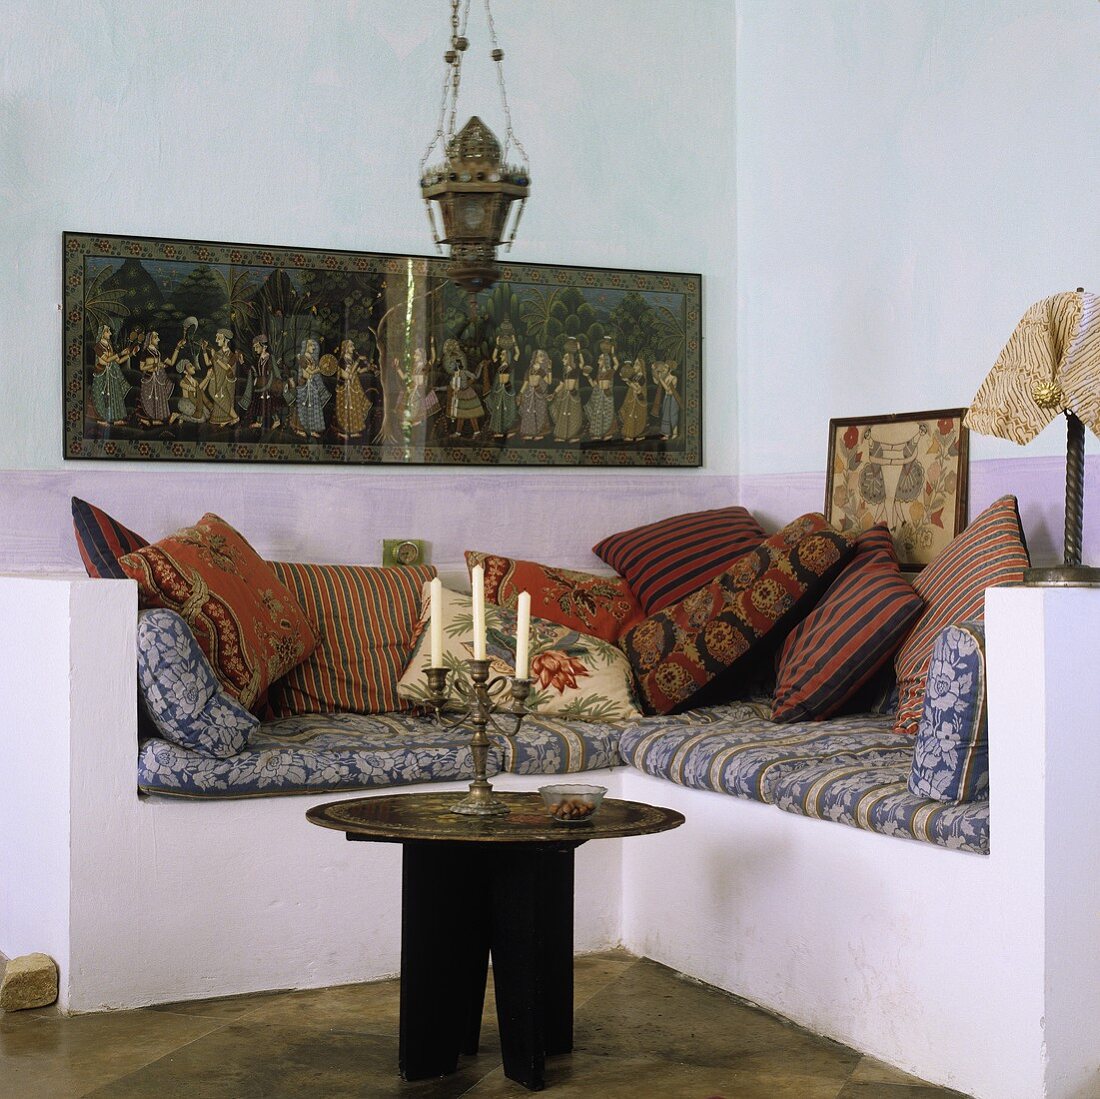 A Mediterranean-style living room corner - and occasional table with a metal tray and a candlestick in front of a concrete, upholstered pedestal with cushions